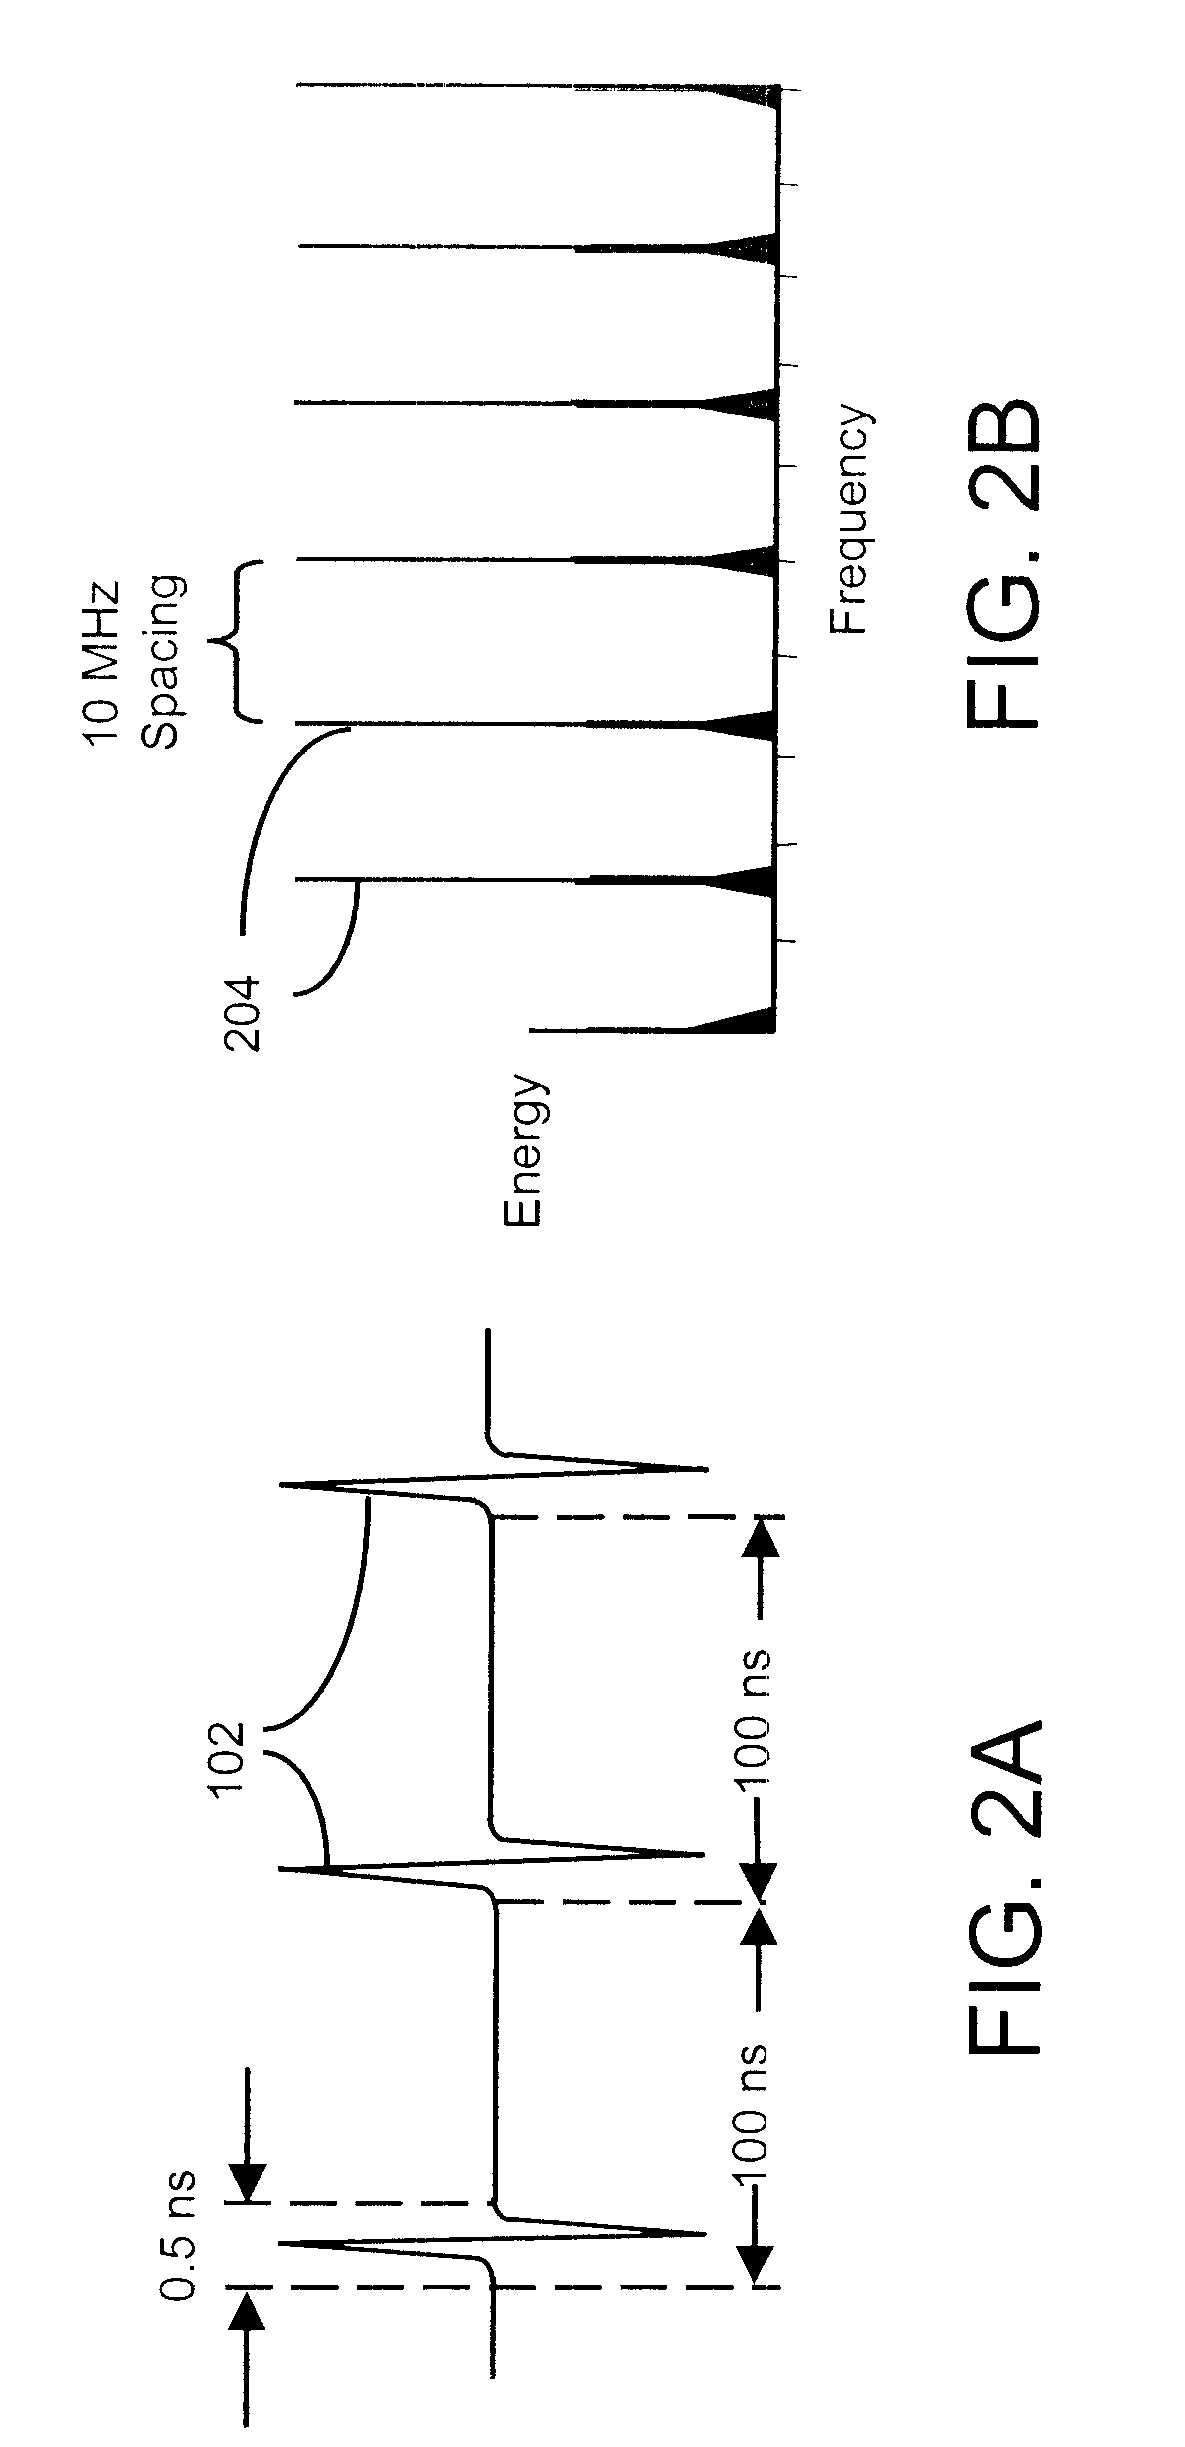 System and method for using impulse radio technology to track and monitor animals